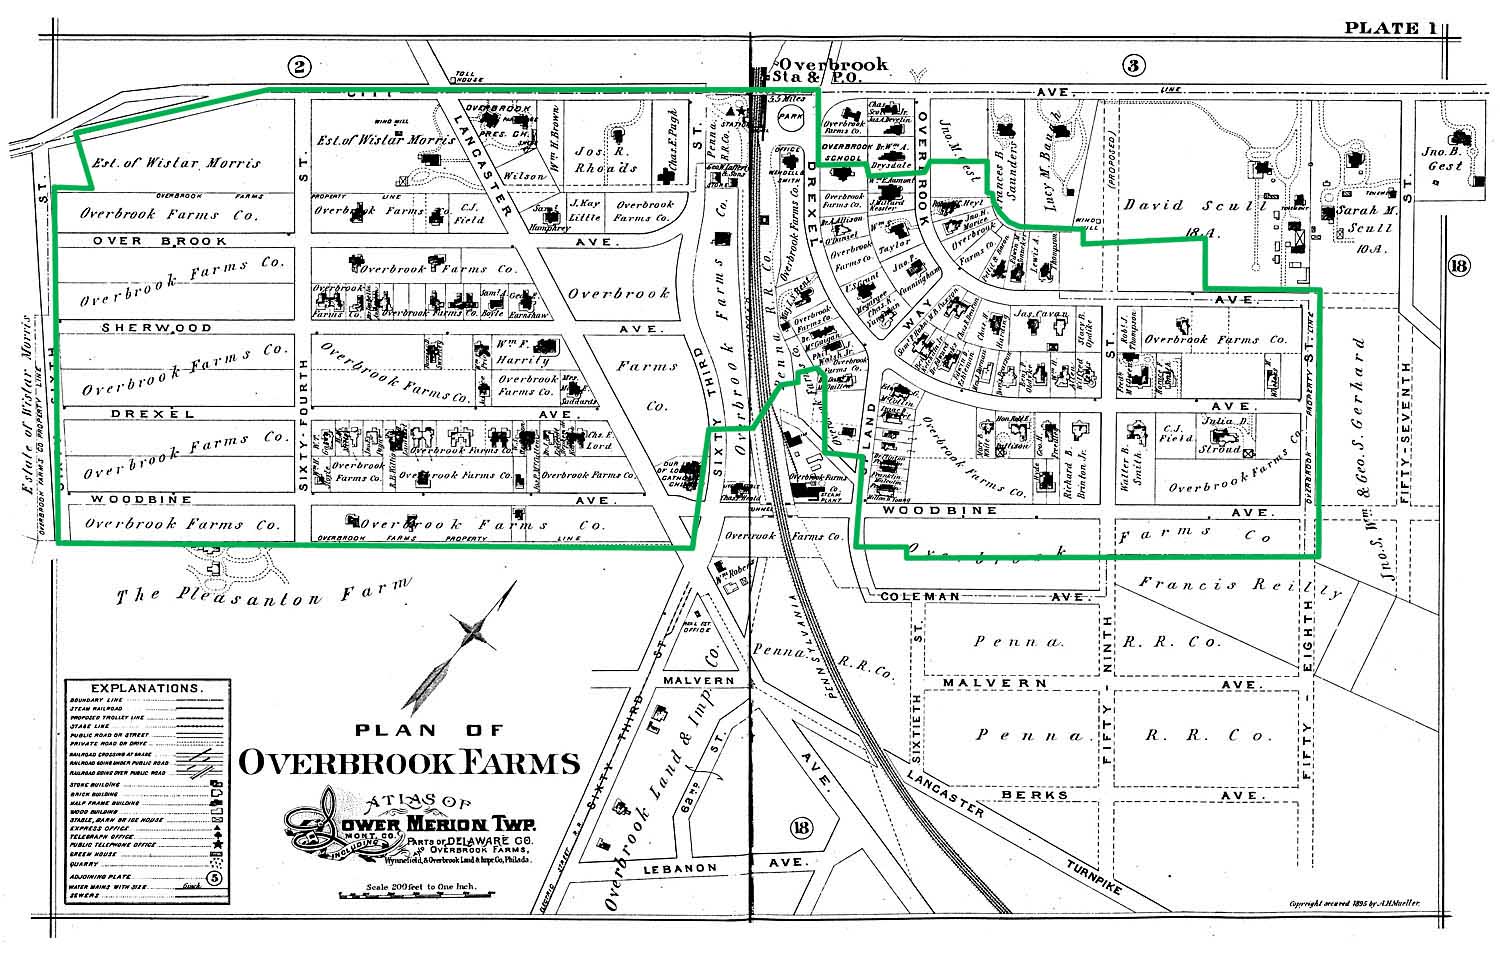 (1896 Plan of Overbrook Farms with rough outline of proposed historic district boundaries overlaid. (Click to enlarge) | 1896 Map from Lower Merion Public Library )